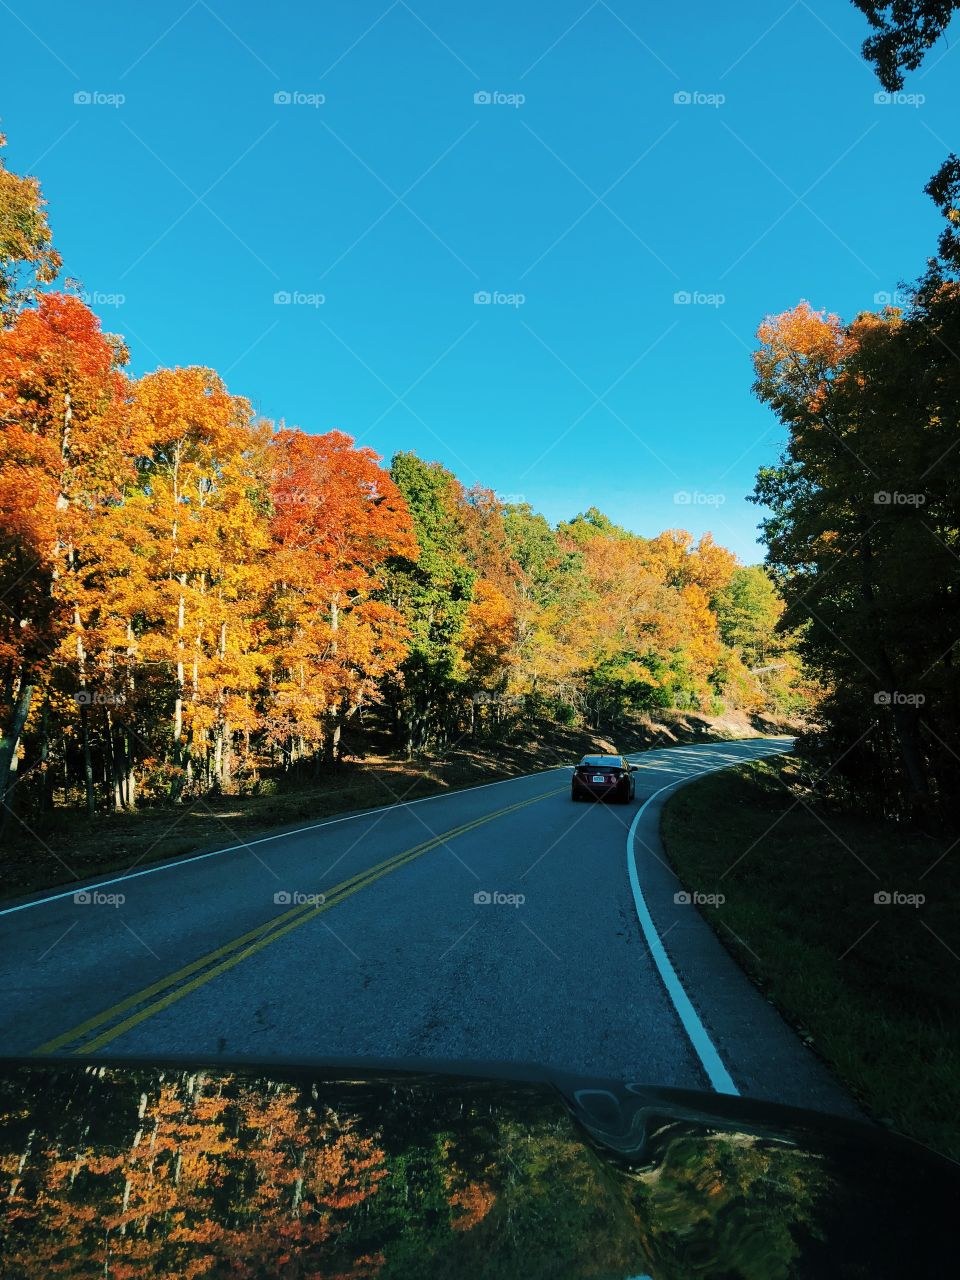 Driving through the winding mountains in Mark Twain National Forest in an autumn day